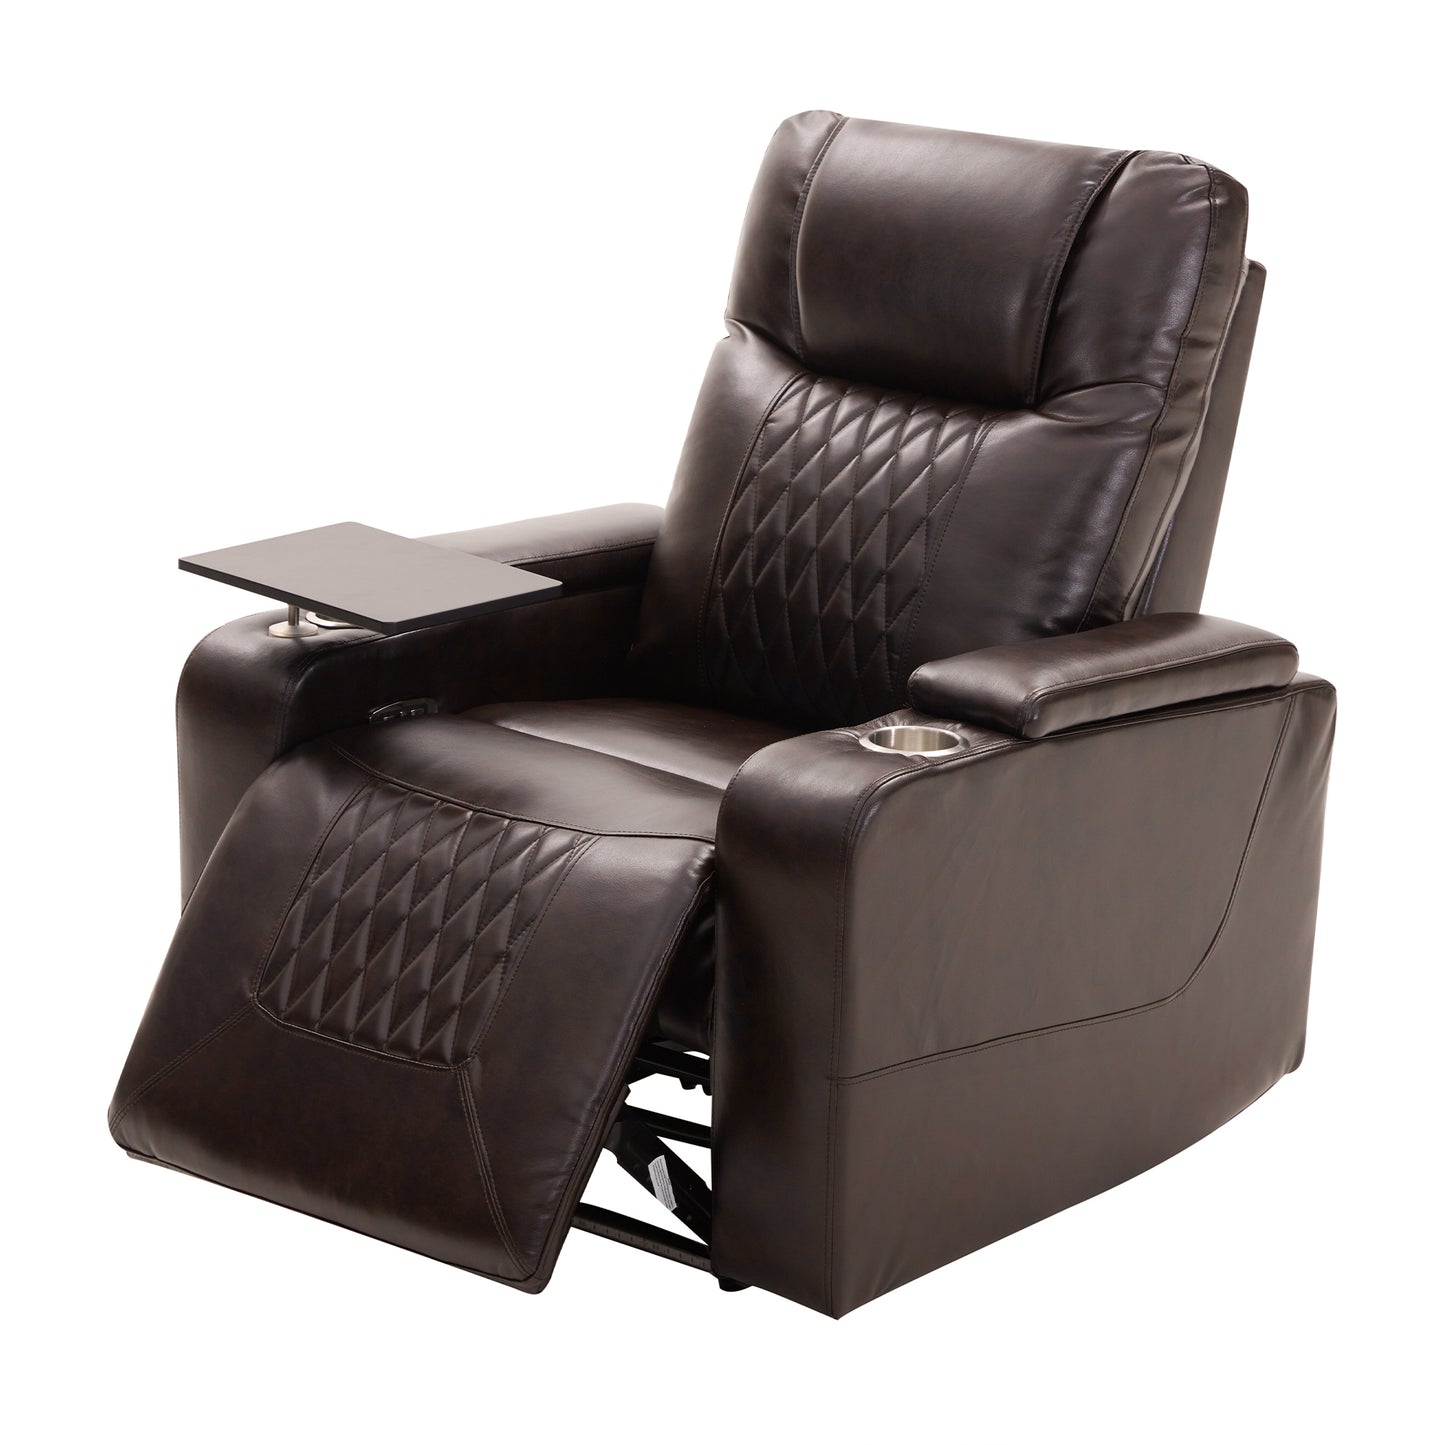 Motion Recliner with USB Port, Cup Holders, Storage